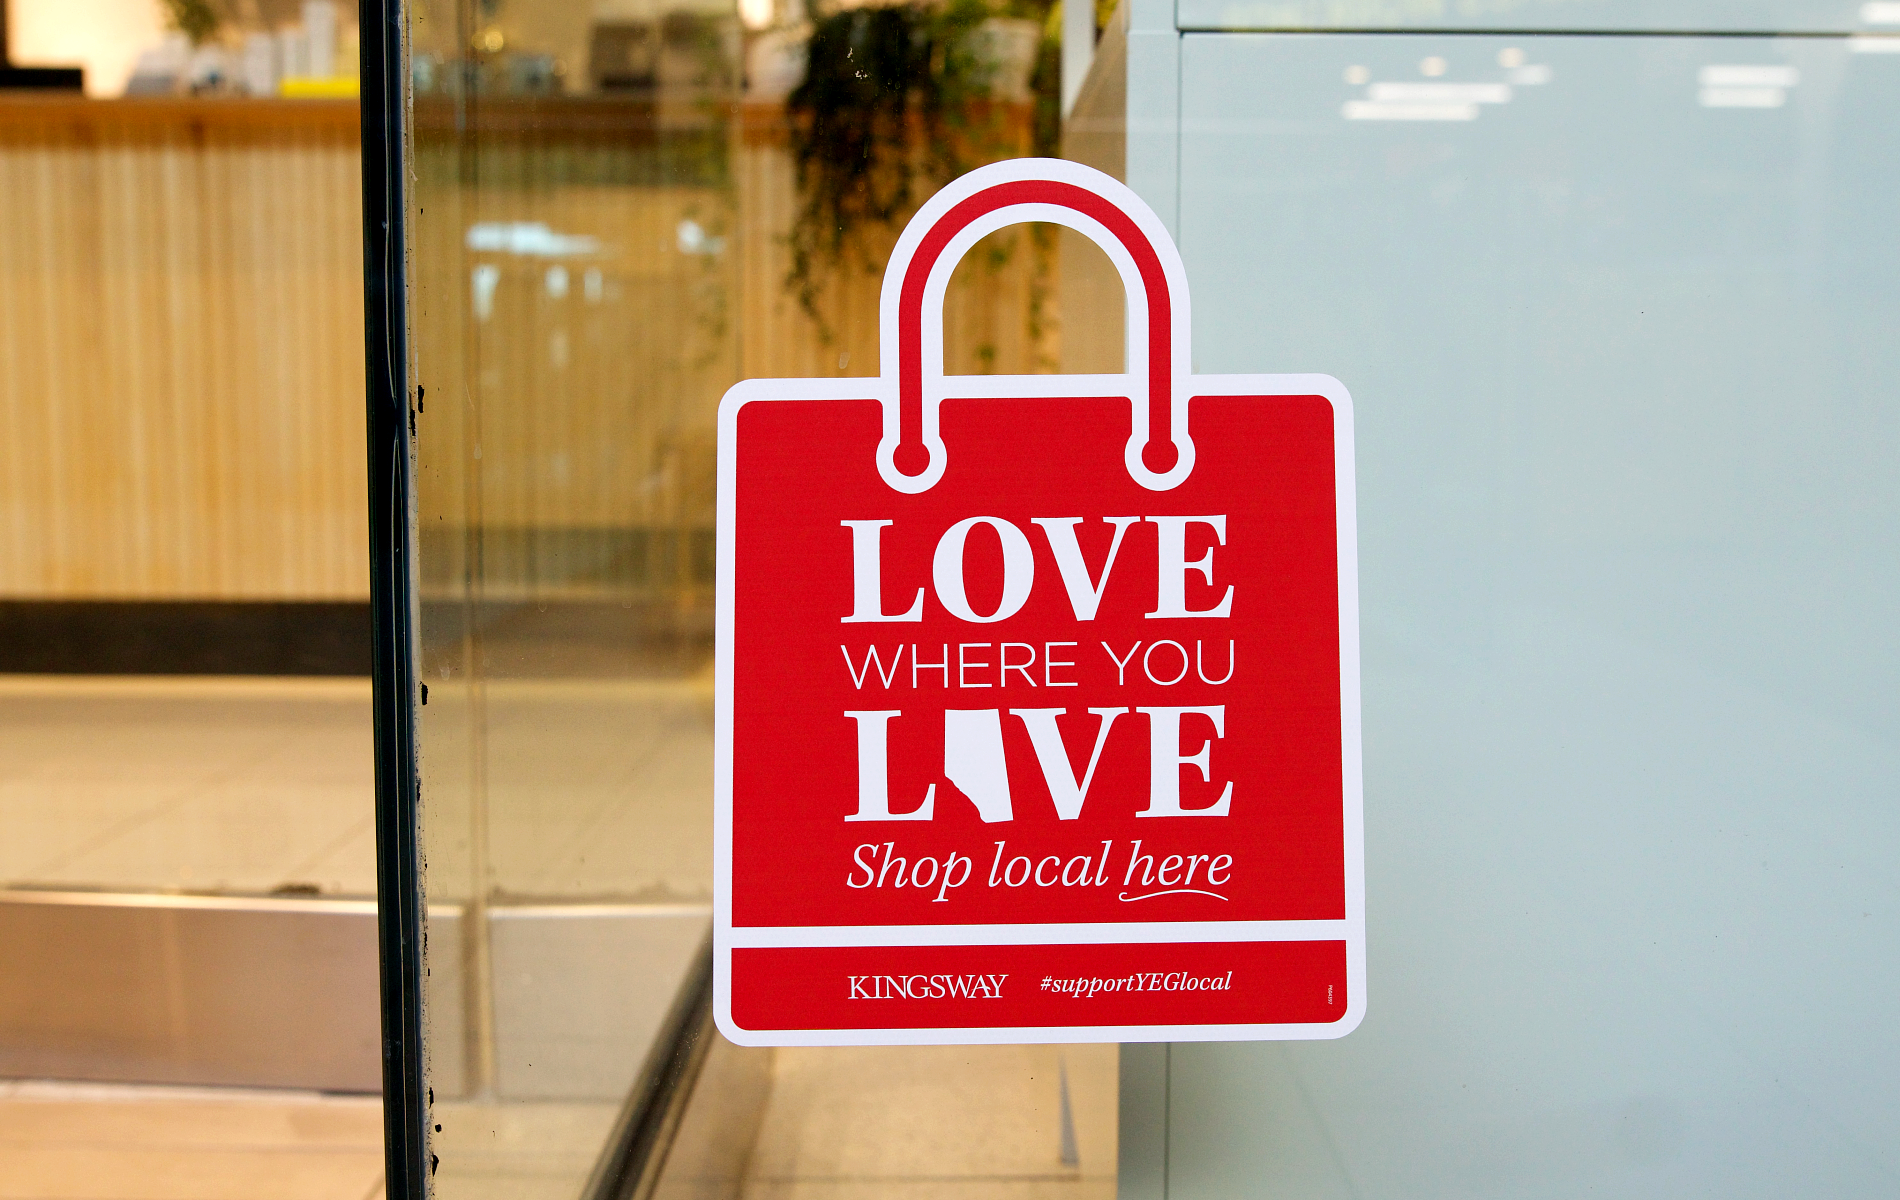 Red shopping bag window decal promoting 'Love Where You Live' message for supporting local businesses